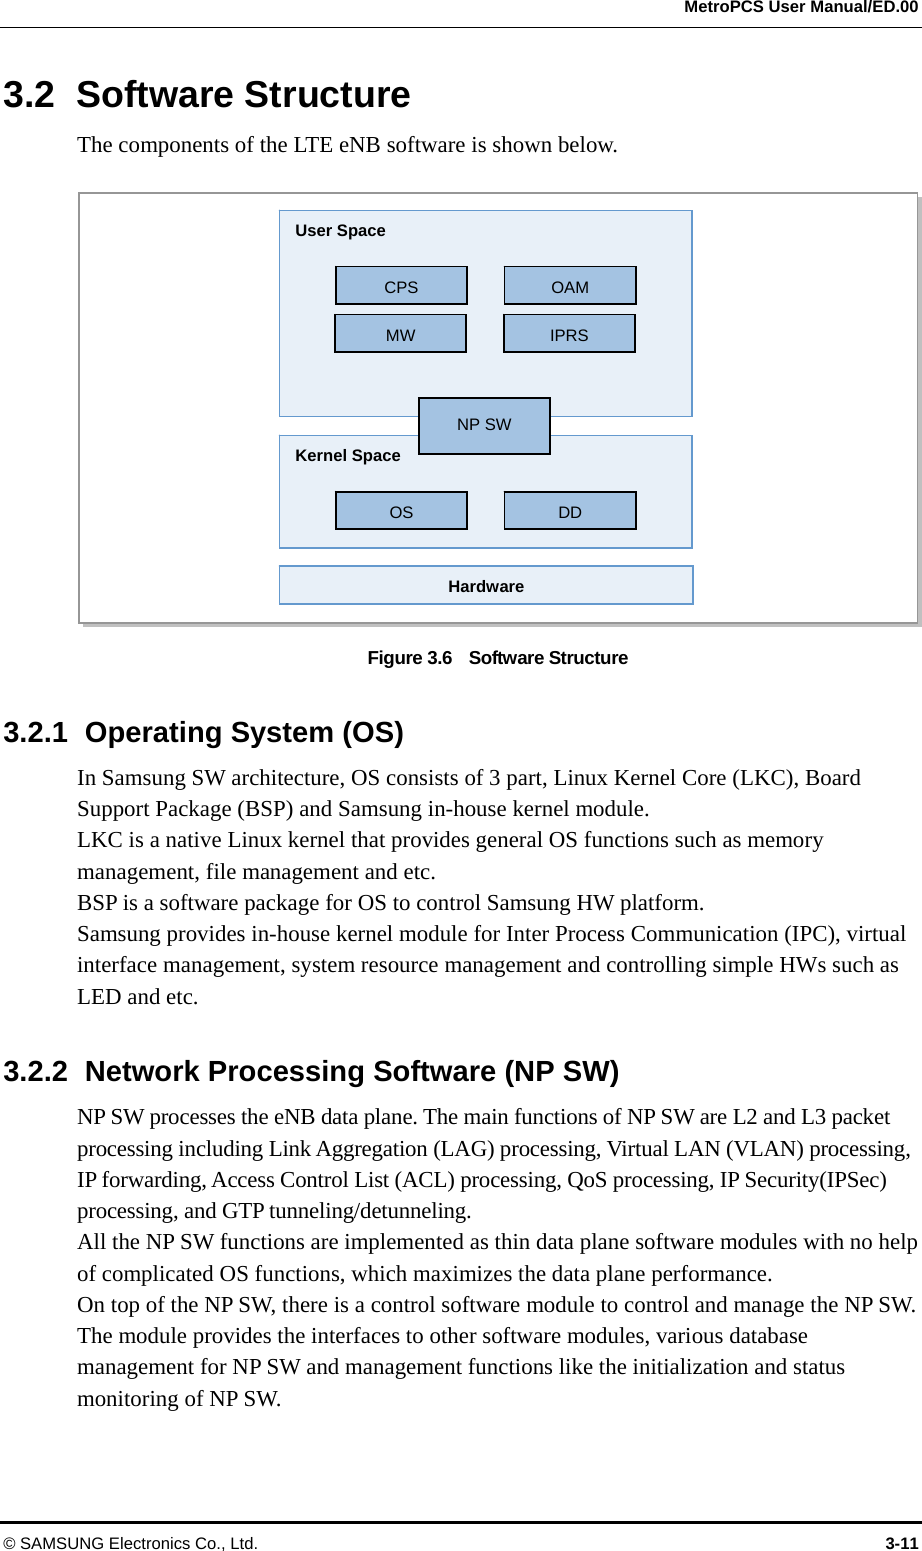  MetroPCS User Manual/ED.00 © SAMSUNG Electronics Co., Ltd.  3-11 3.2 Software Structure The components of the LTE eNB software is shown below.  Figure 3.6    Software Structure  3.2.1  Operating System (OS) In Samsung SW architecture, OS consists of 3 part, Linux Kernel Core (LKC), Board Support Package (BSP) and Samsung in-house kernel module. LKC is a native Linux kernel that provides general OS functions such as memory management, file management and etc. BSP is a software package for OS to control Samsung HW platform. Samsung provides in-house kernel module for Inter Process Communication (IPC), virtual interface management, system resource management and controlling simple HWs such as LED and etc.  3.2.2  Network Processing Software (NP SW) NP SW processes the eNB data plane. The main functions of NP SW are L2 and L3 packet processing including Link Aggregation (LAG) processing, Virtual LAN (VLAN) processing, IP forwarding, Access Control List (ACL) processing, QoS processing, IP Security(IPSec) processing, and GTP tunneling/detunneling. All the NP SW functions are implemented as thin data plane software modules with no help of complicated OS functions, which maximizes the data plane performance. On top of the NP SW, there is a control software module to control and manage the NP SW. The module provides the interfaces to other software modules, various database management for NP SW and management functions like the initialization and status monitoring of NP SW. User Space CPS OAMMW IPRSKernel Space OS DDHardwareNP SW 